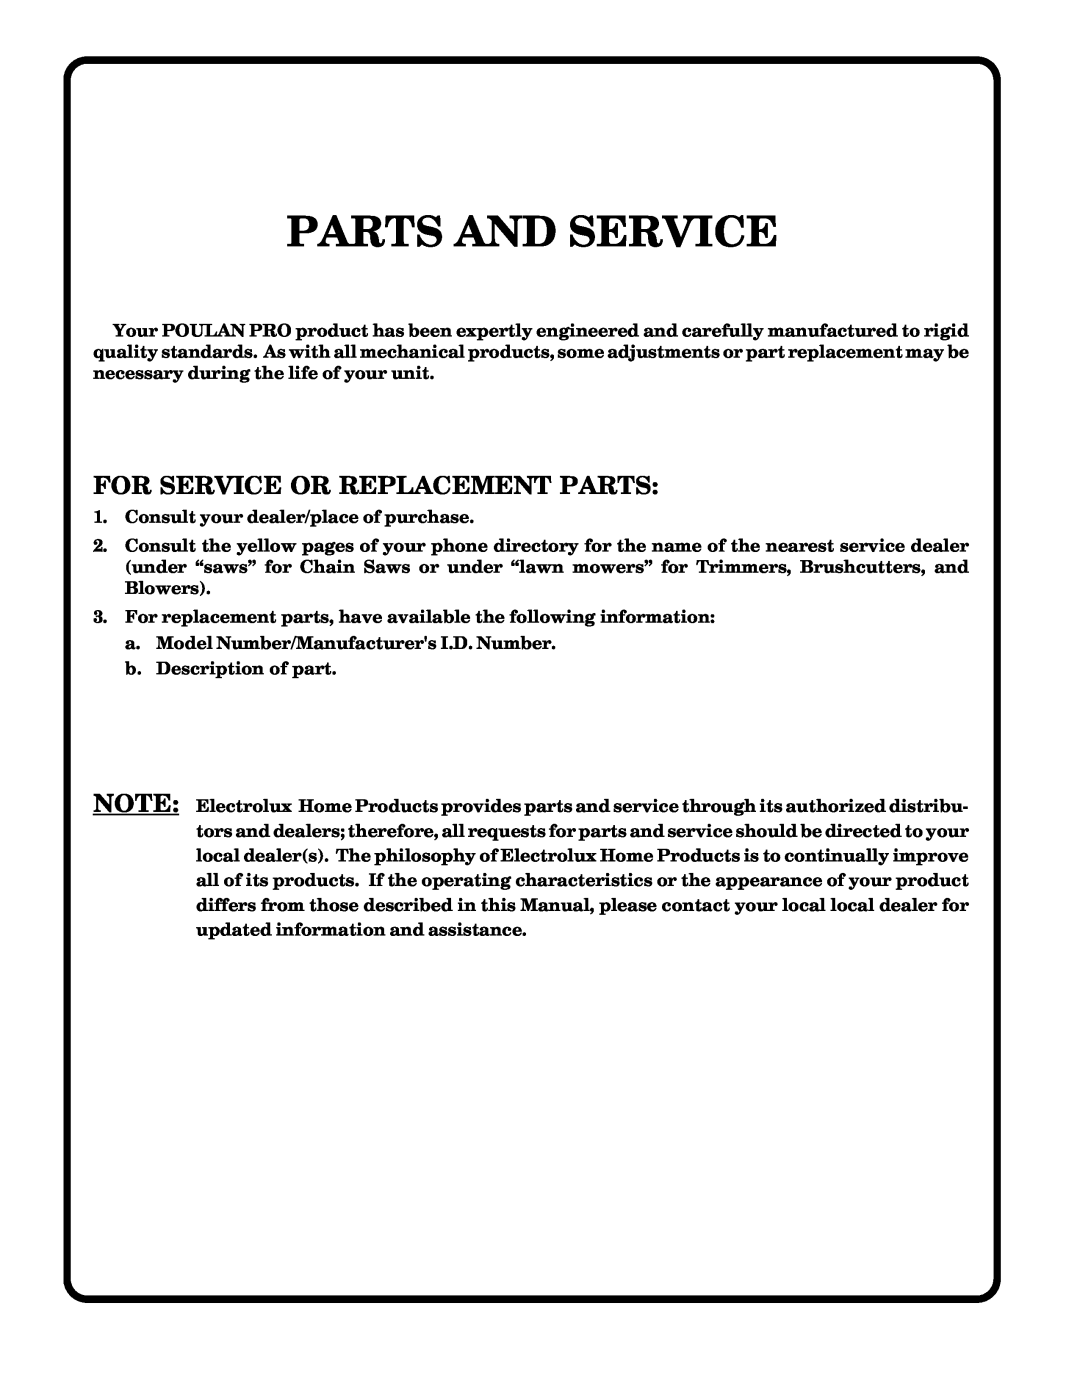 Poulan DPR22H46STB owner manual Parts And Service, For Service Or Replacement Parts 